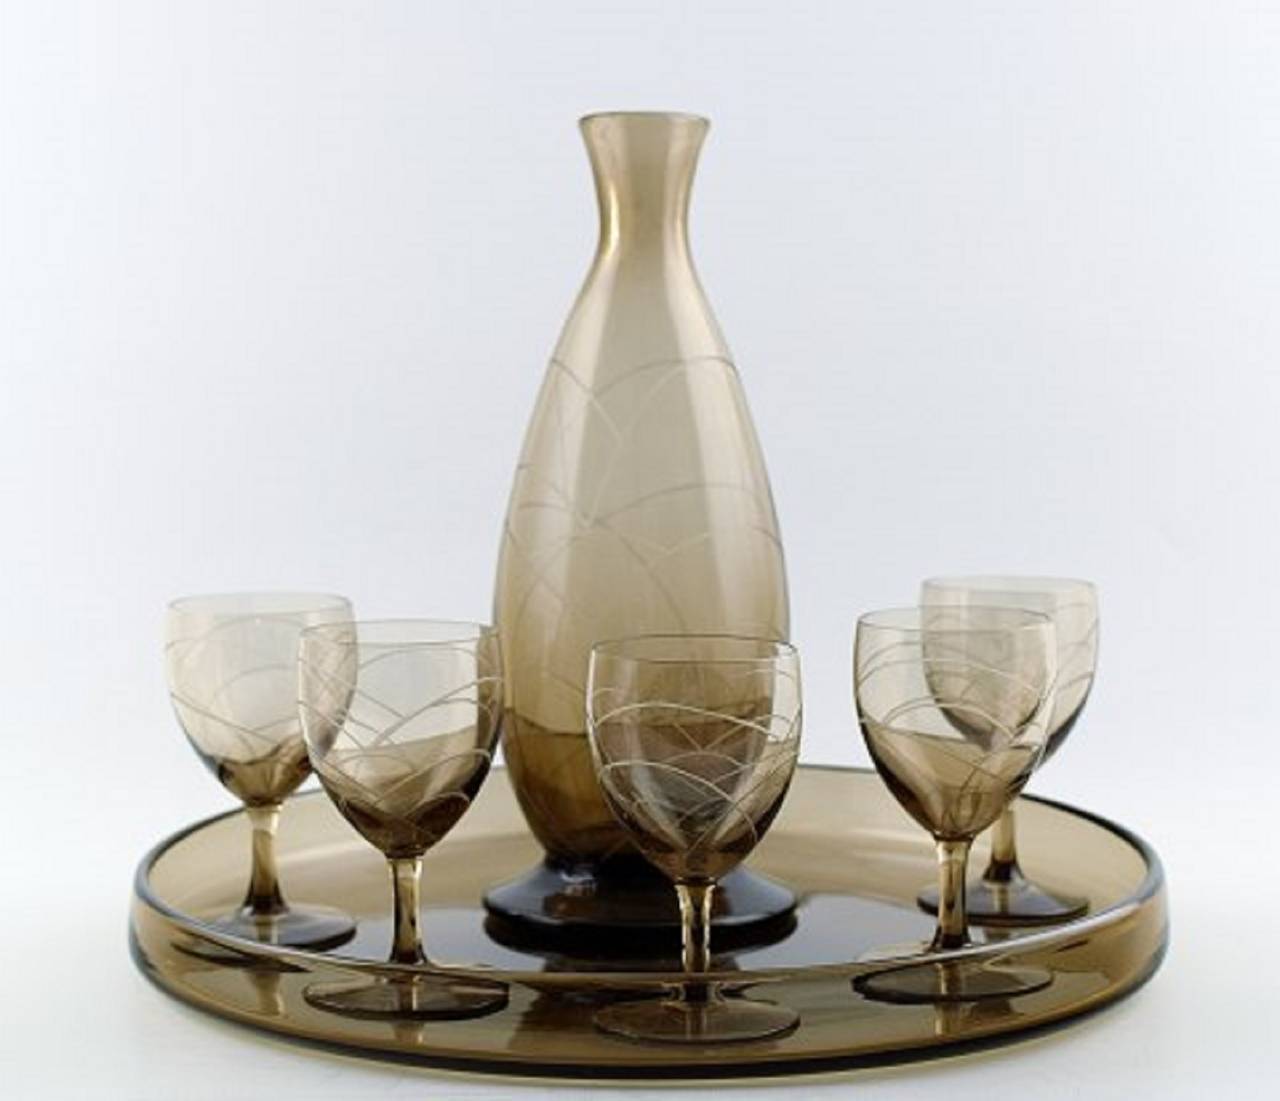 Daum Nancy Art Deco bar set, decanter and five glasses on tray.
The decanter measures 25cm.
Hallmarked.
In perfect condition.